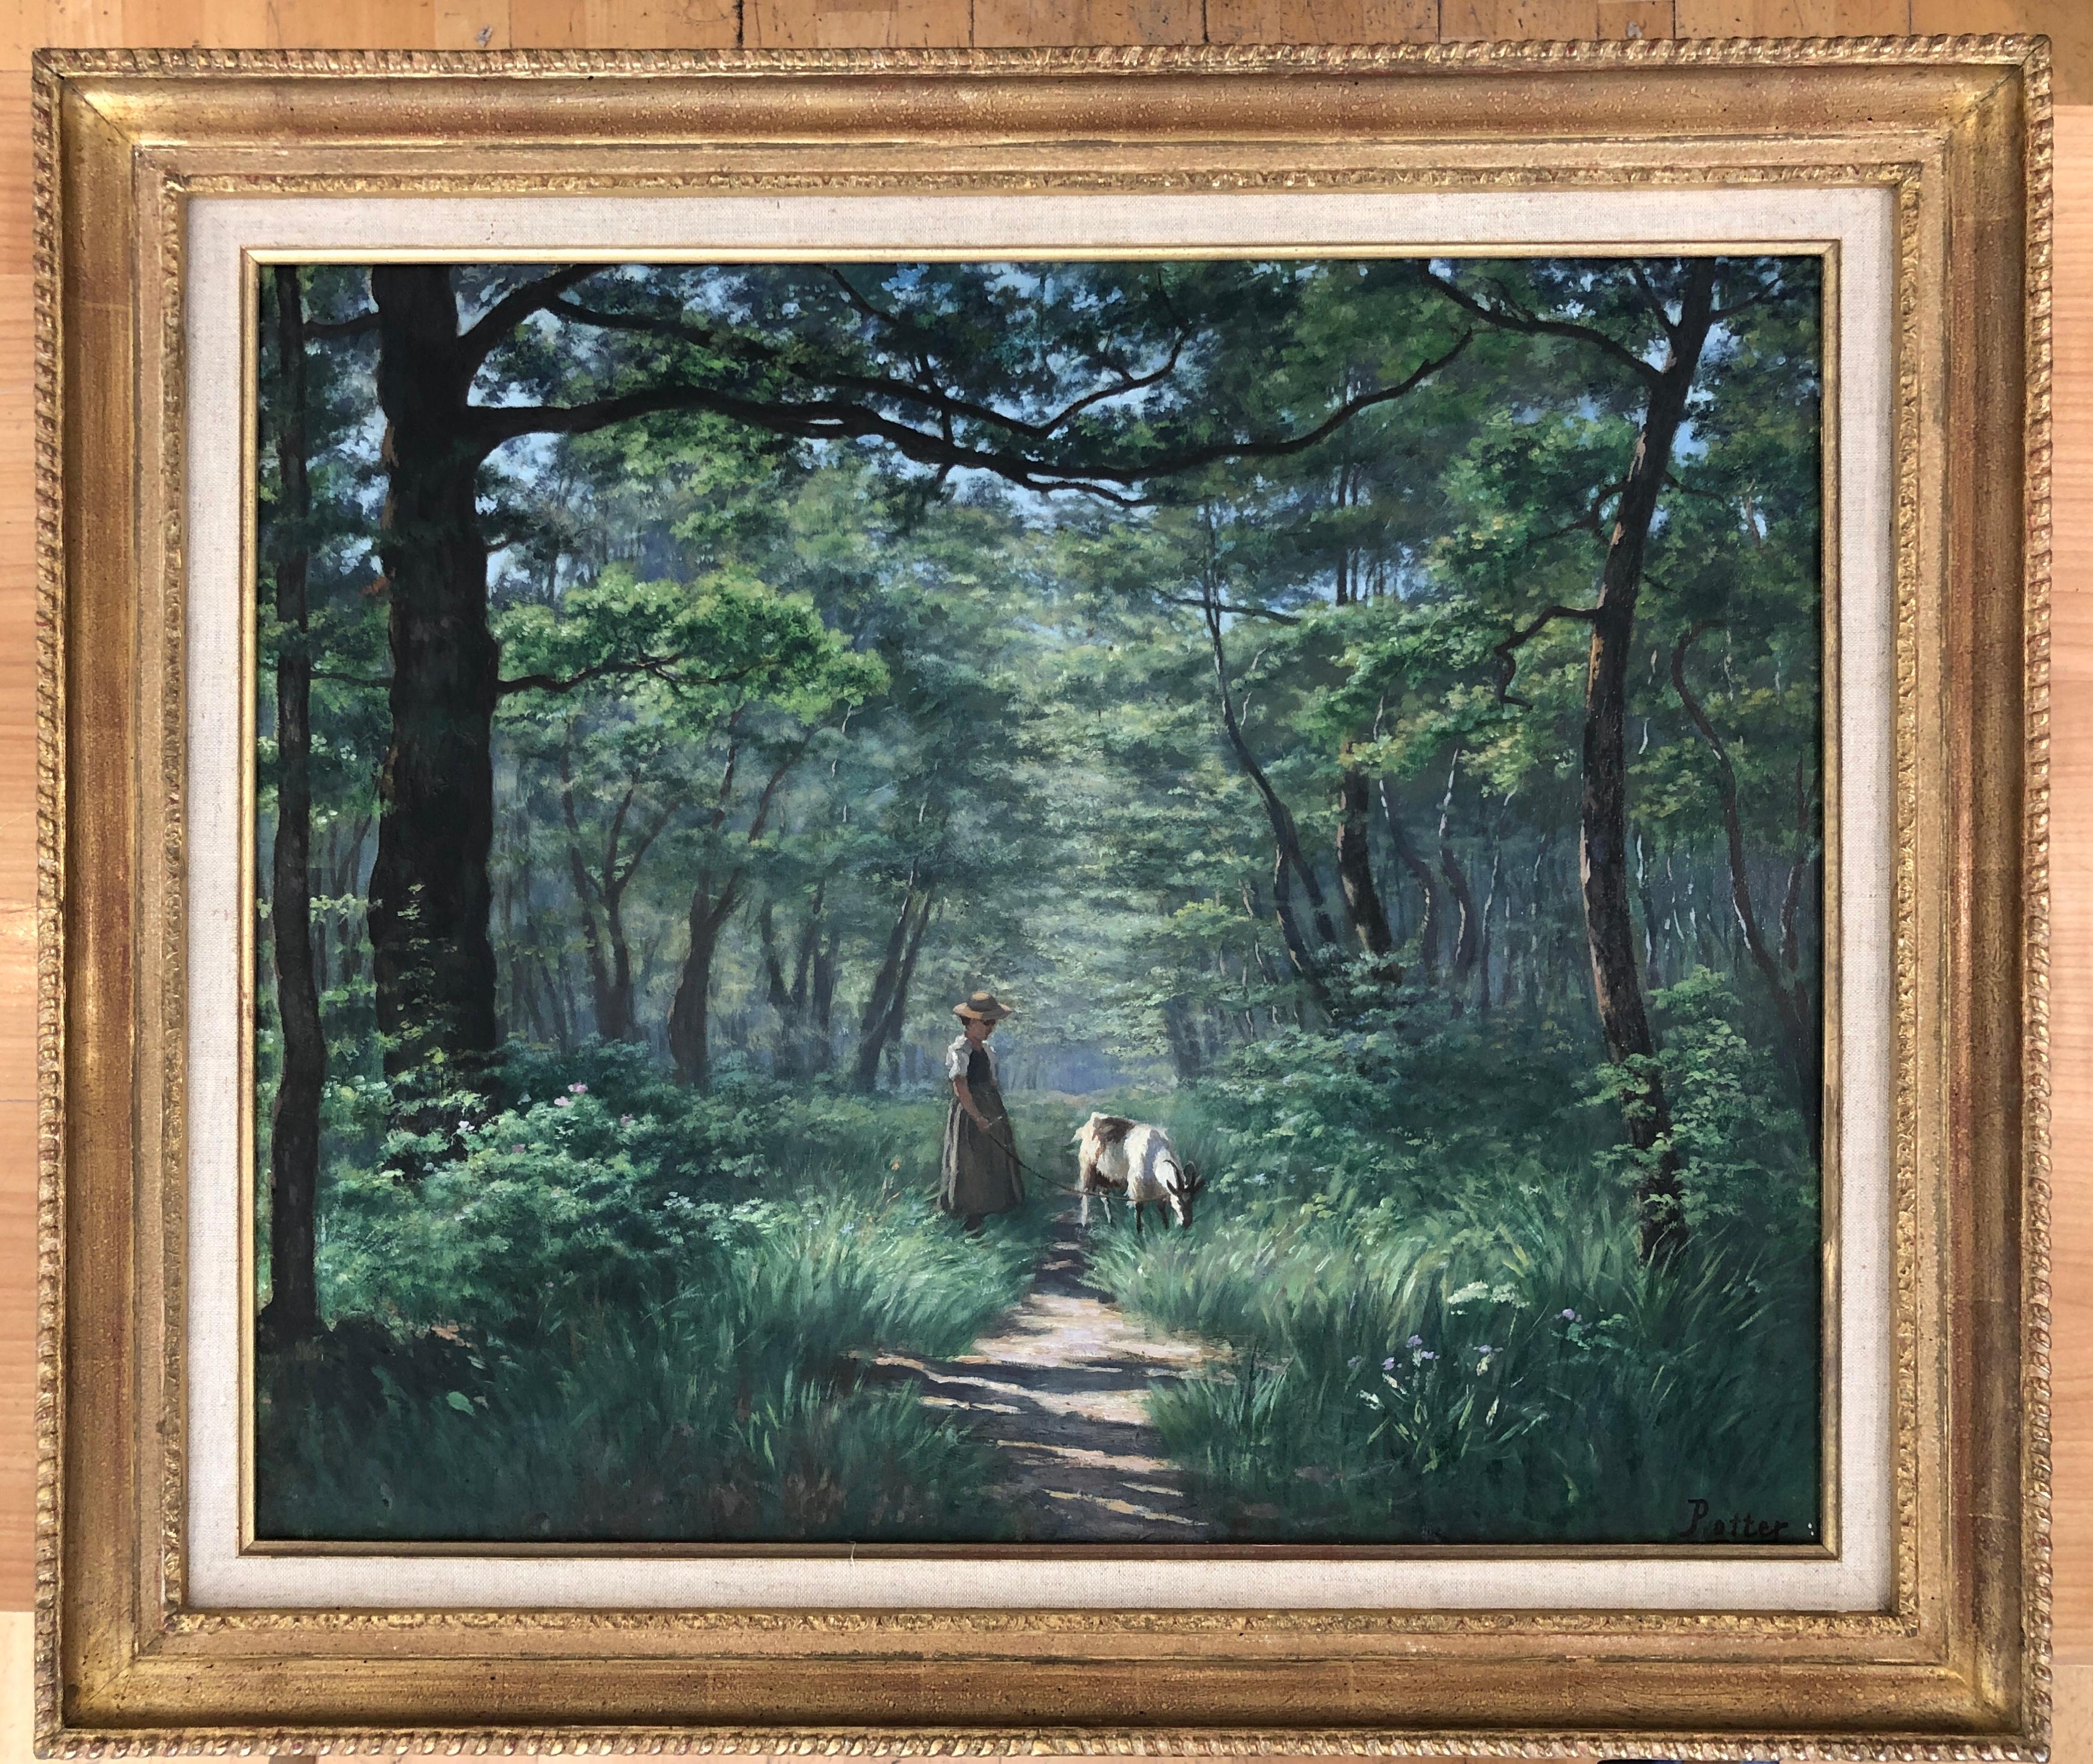 Woman and goat in a wooded landscape - Painting by Adolphe Potter